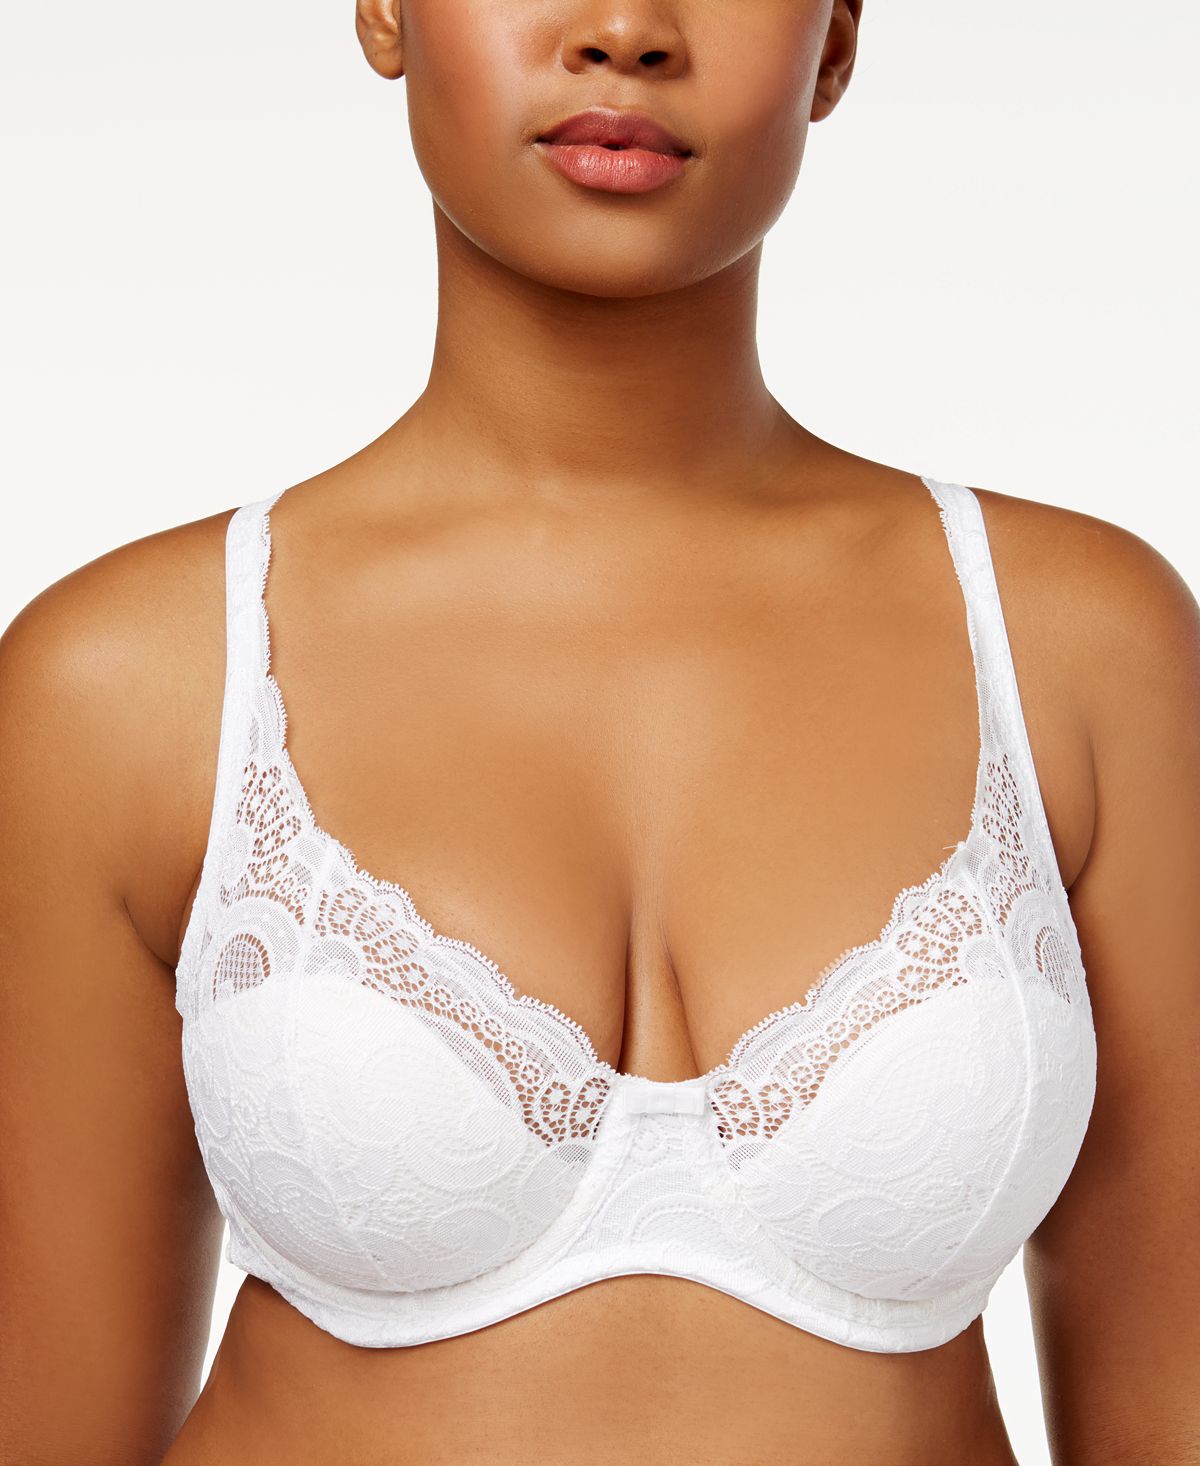 http://www.cheapundies.com/cdn/shop/products/Playtex-Love-My-Curves-Beautiful-Lift-Lightly-Lined-Underwire-Bra-Us4514-White_144394_c6823842-8c22-44c7-9701-631aafd55819.jpg?v=1697564894